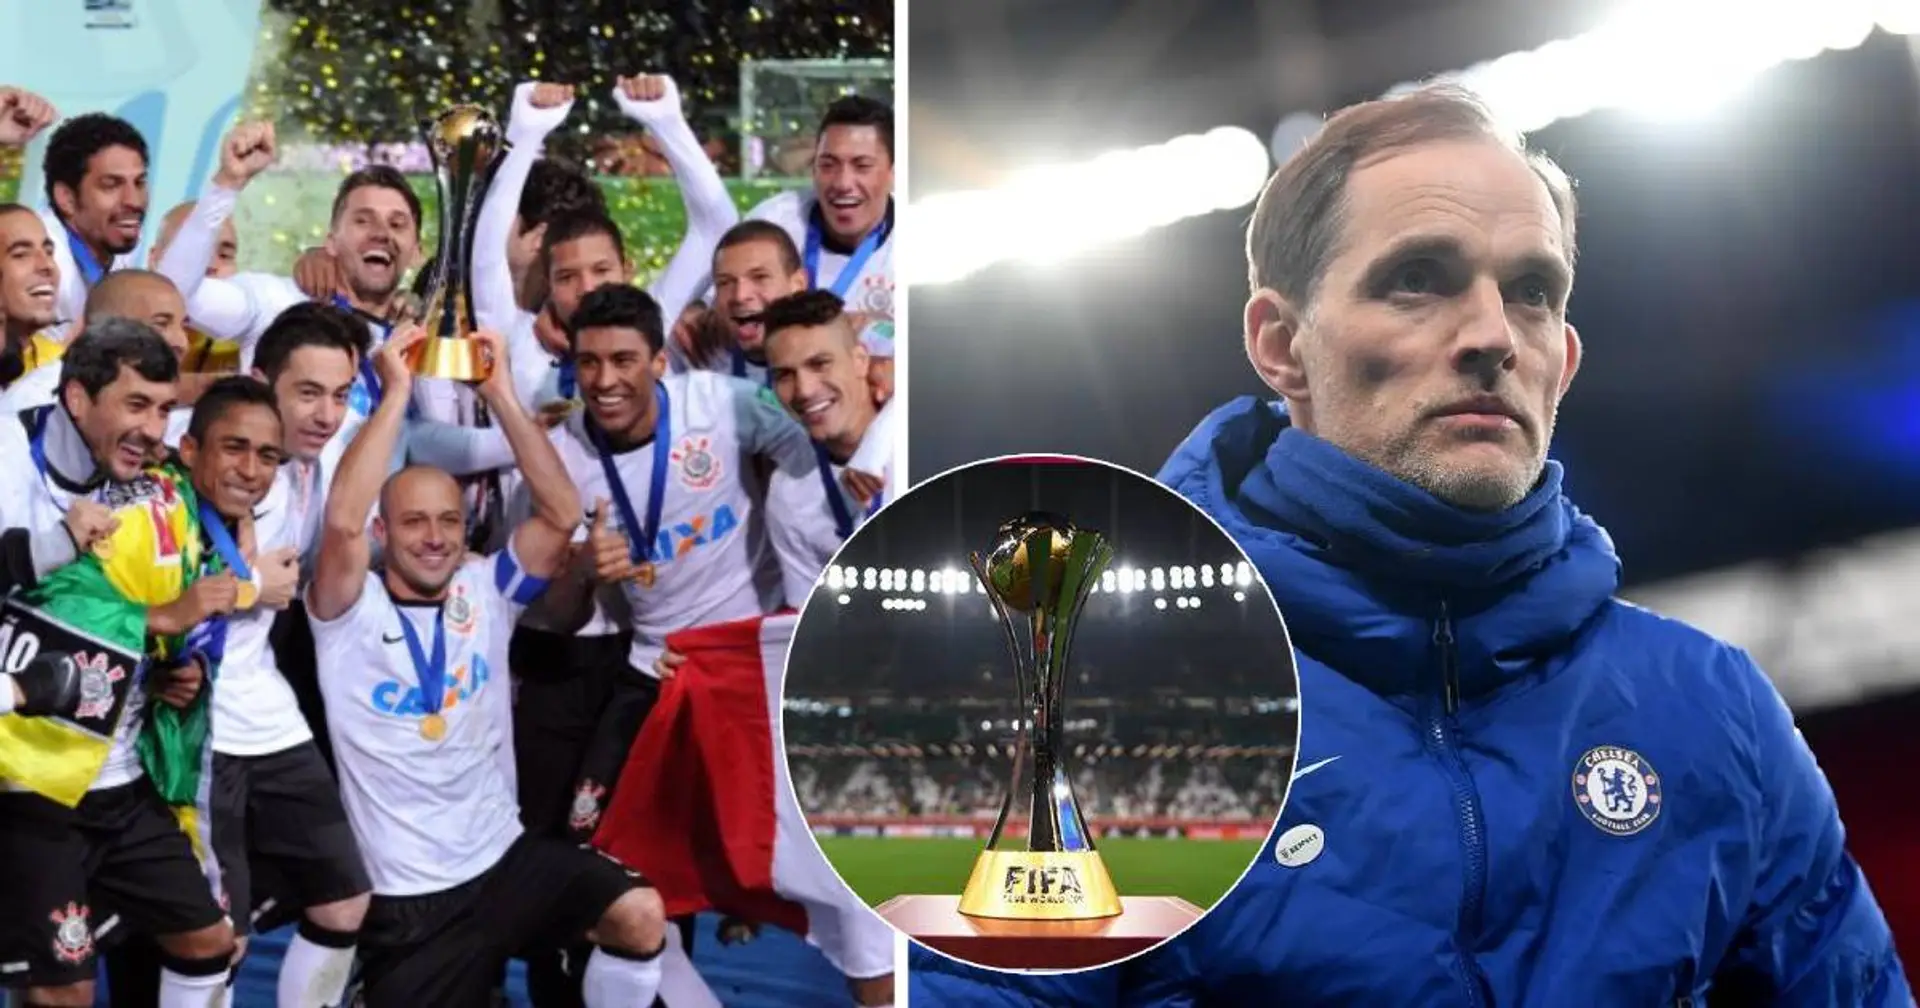 How have South American teams performed against European sides in Club World Cup final? Answered